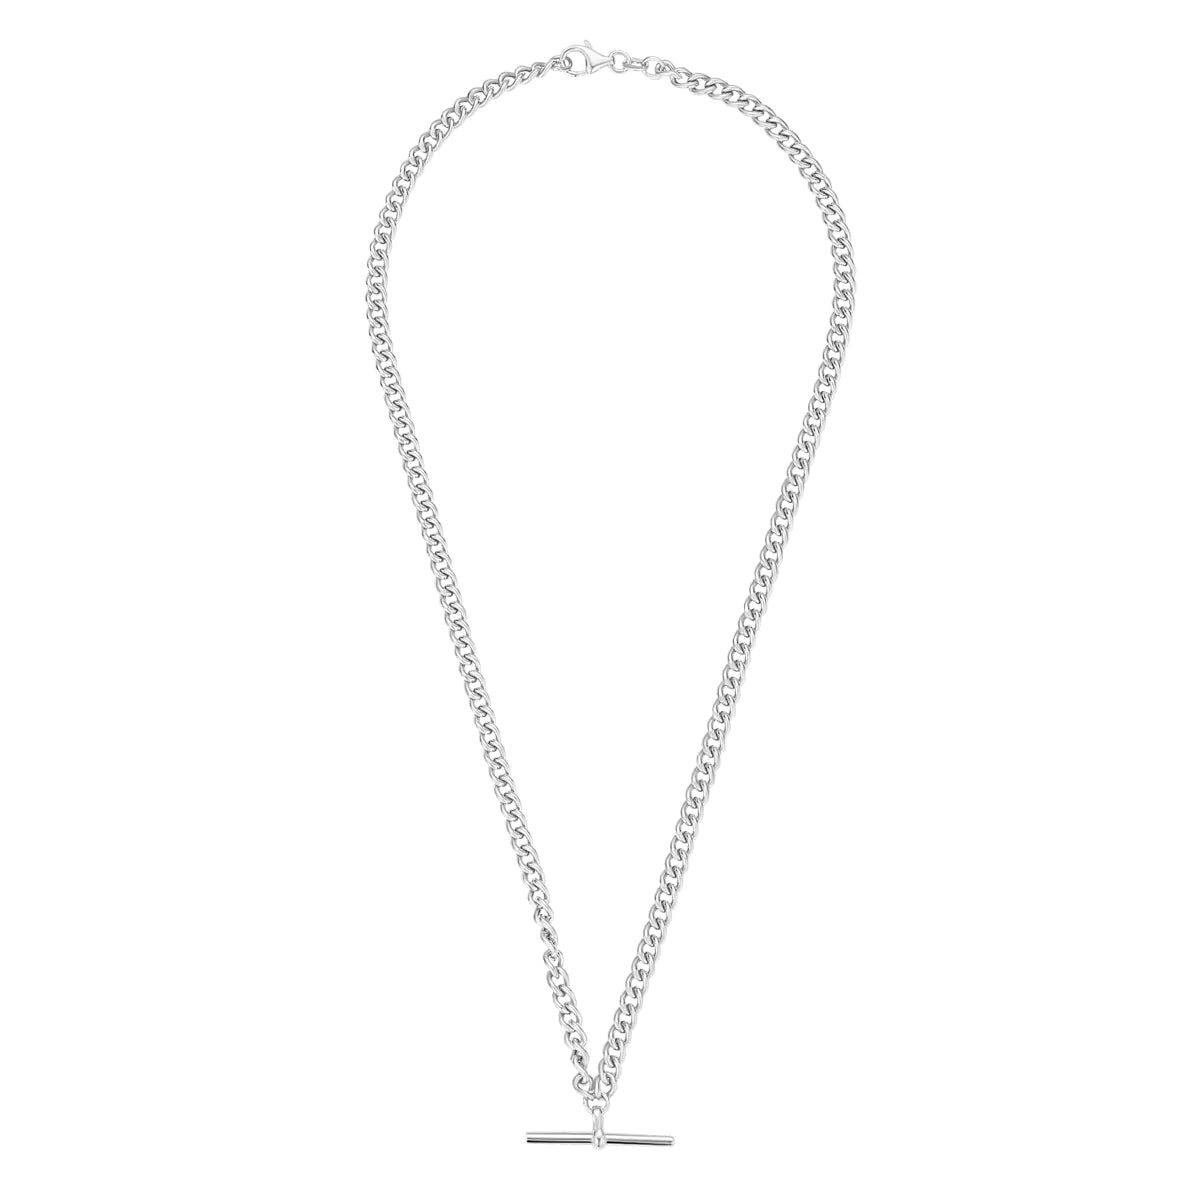 Sterling Silver Contemporary T-Bar Curb Necklace